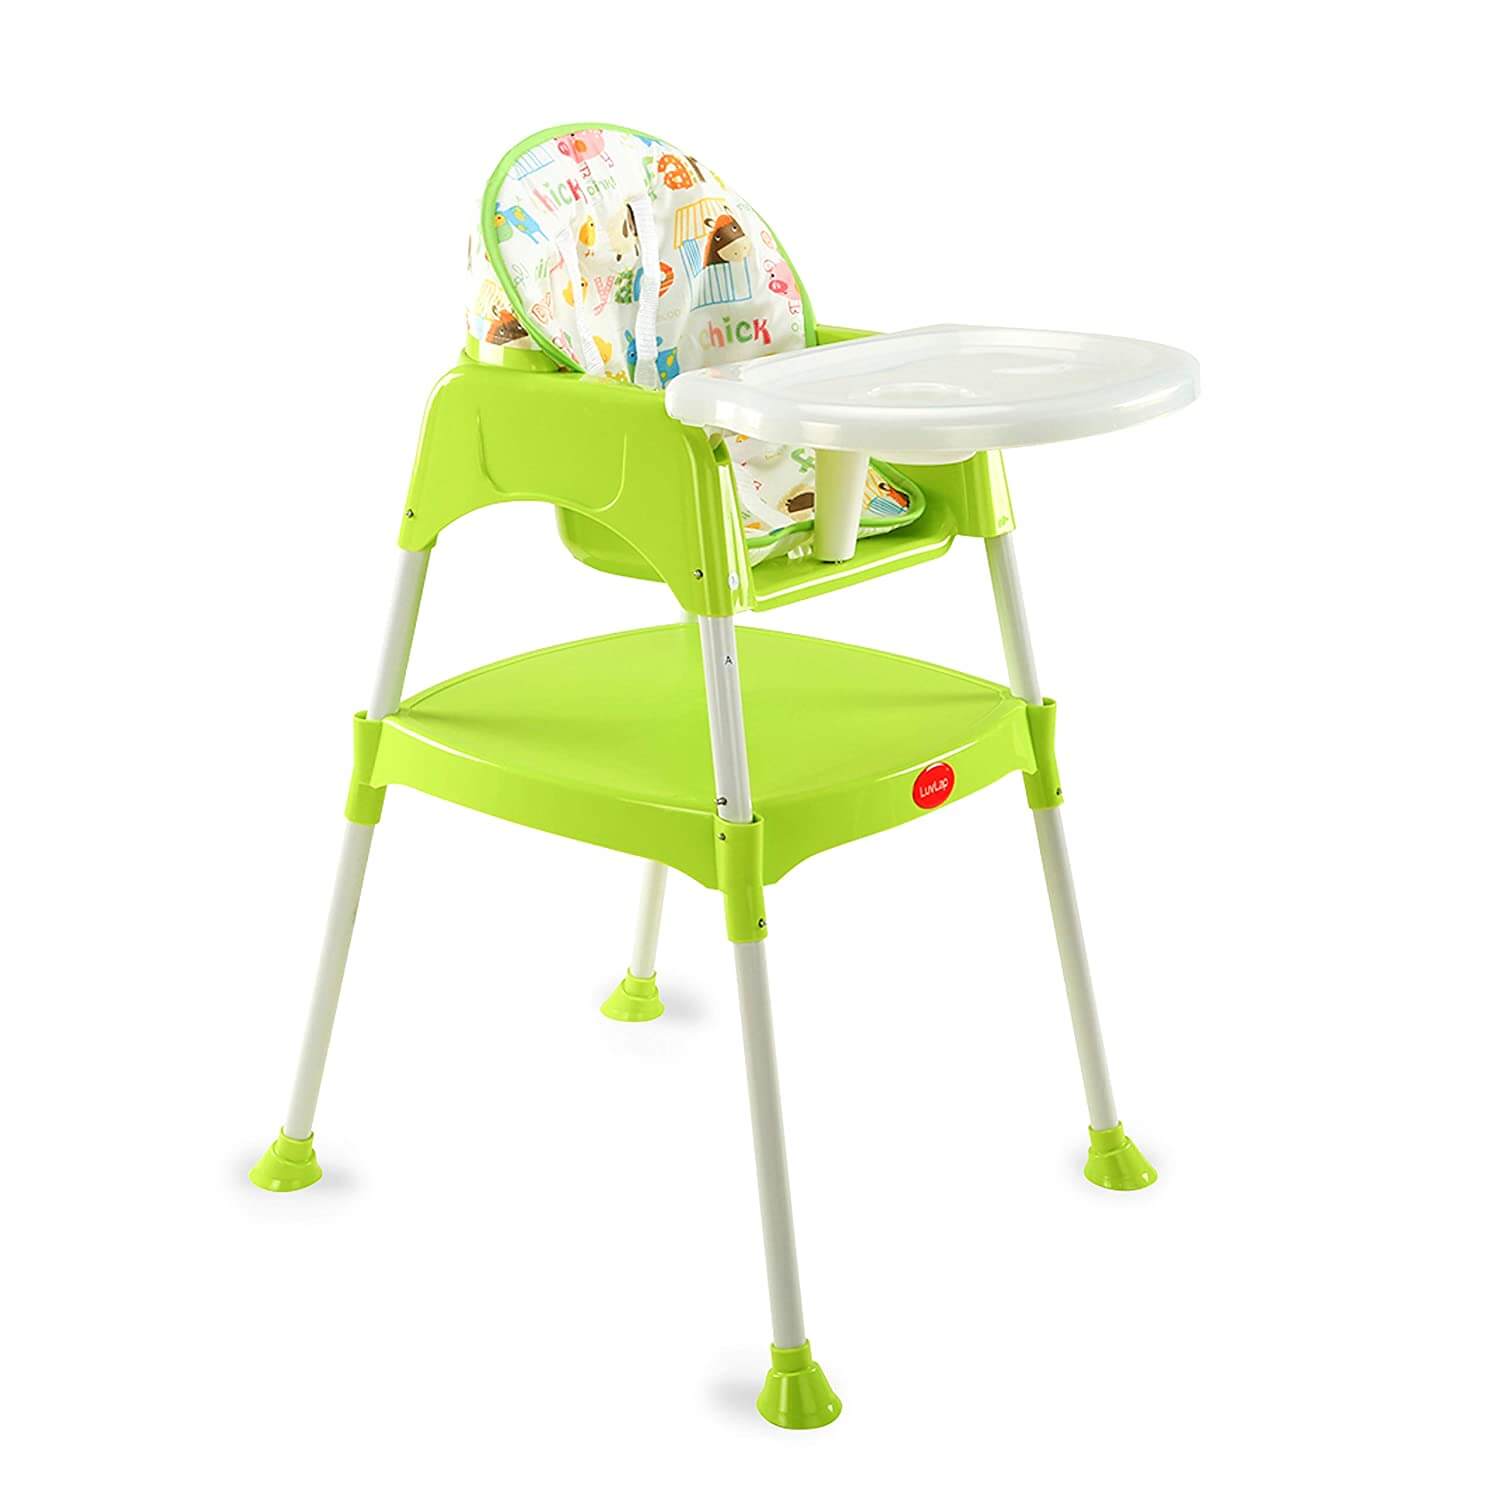 Luvlap 3 in 1 Convertible High Chair 